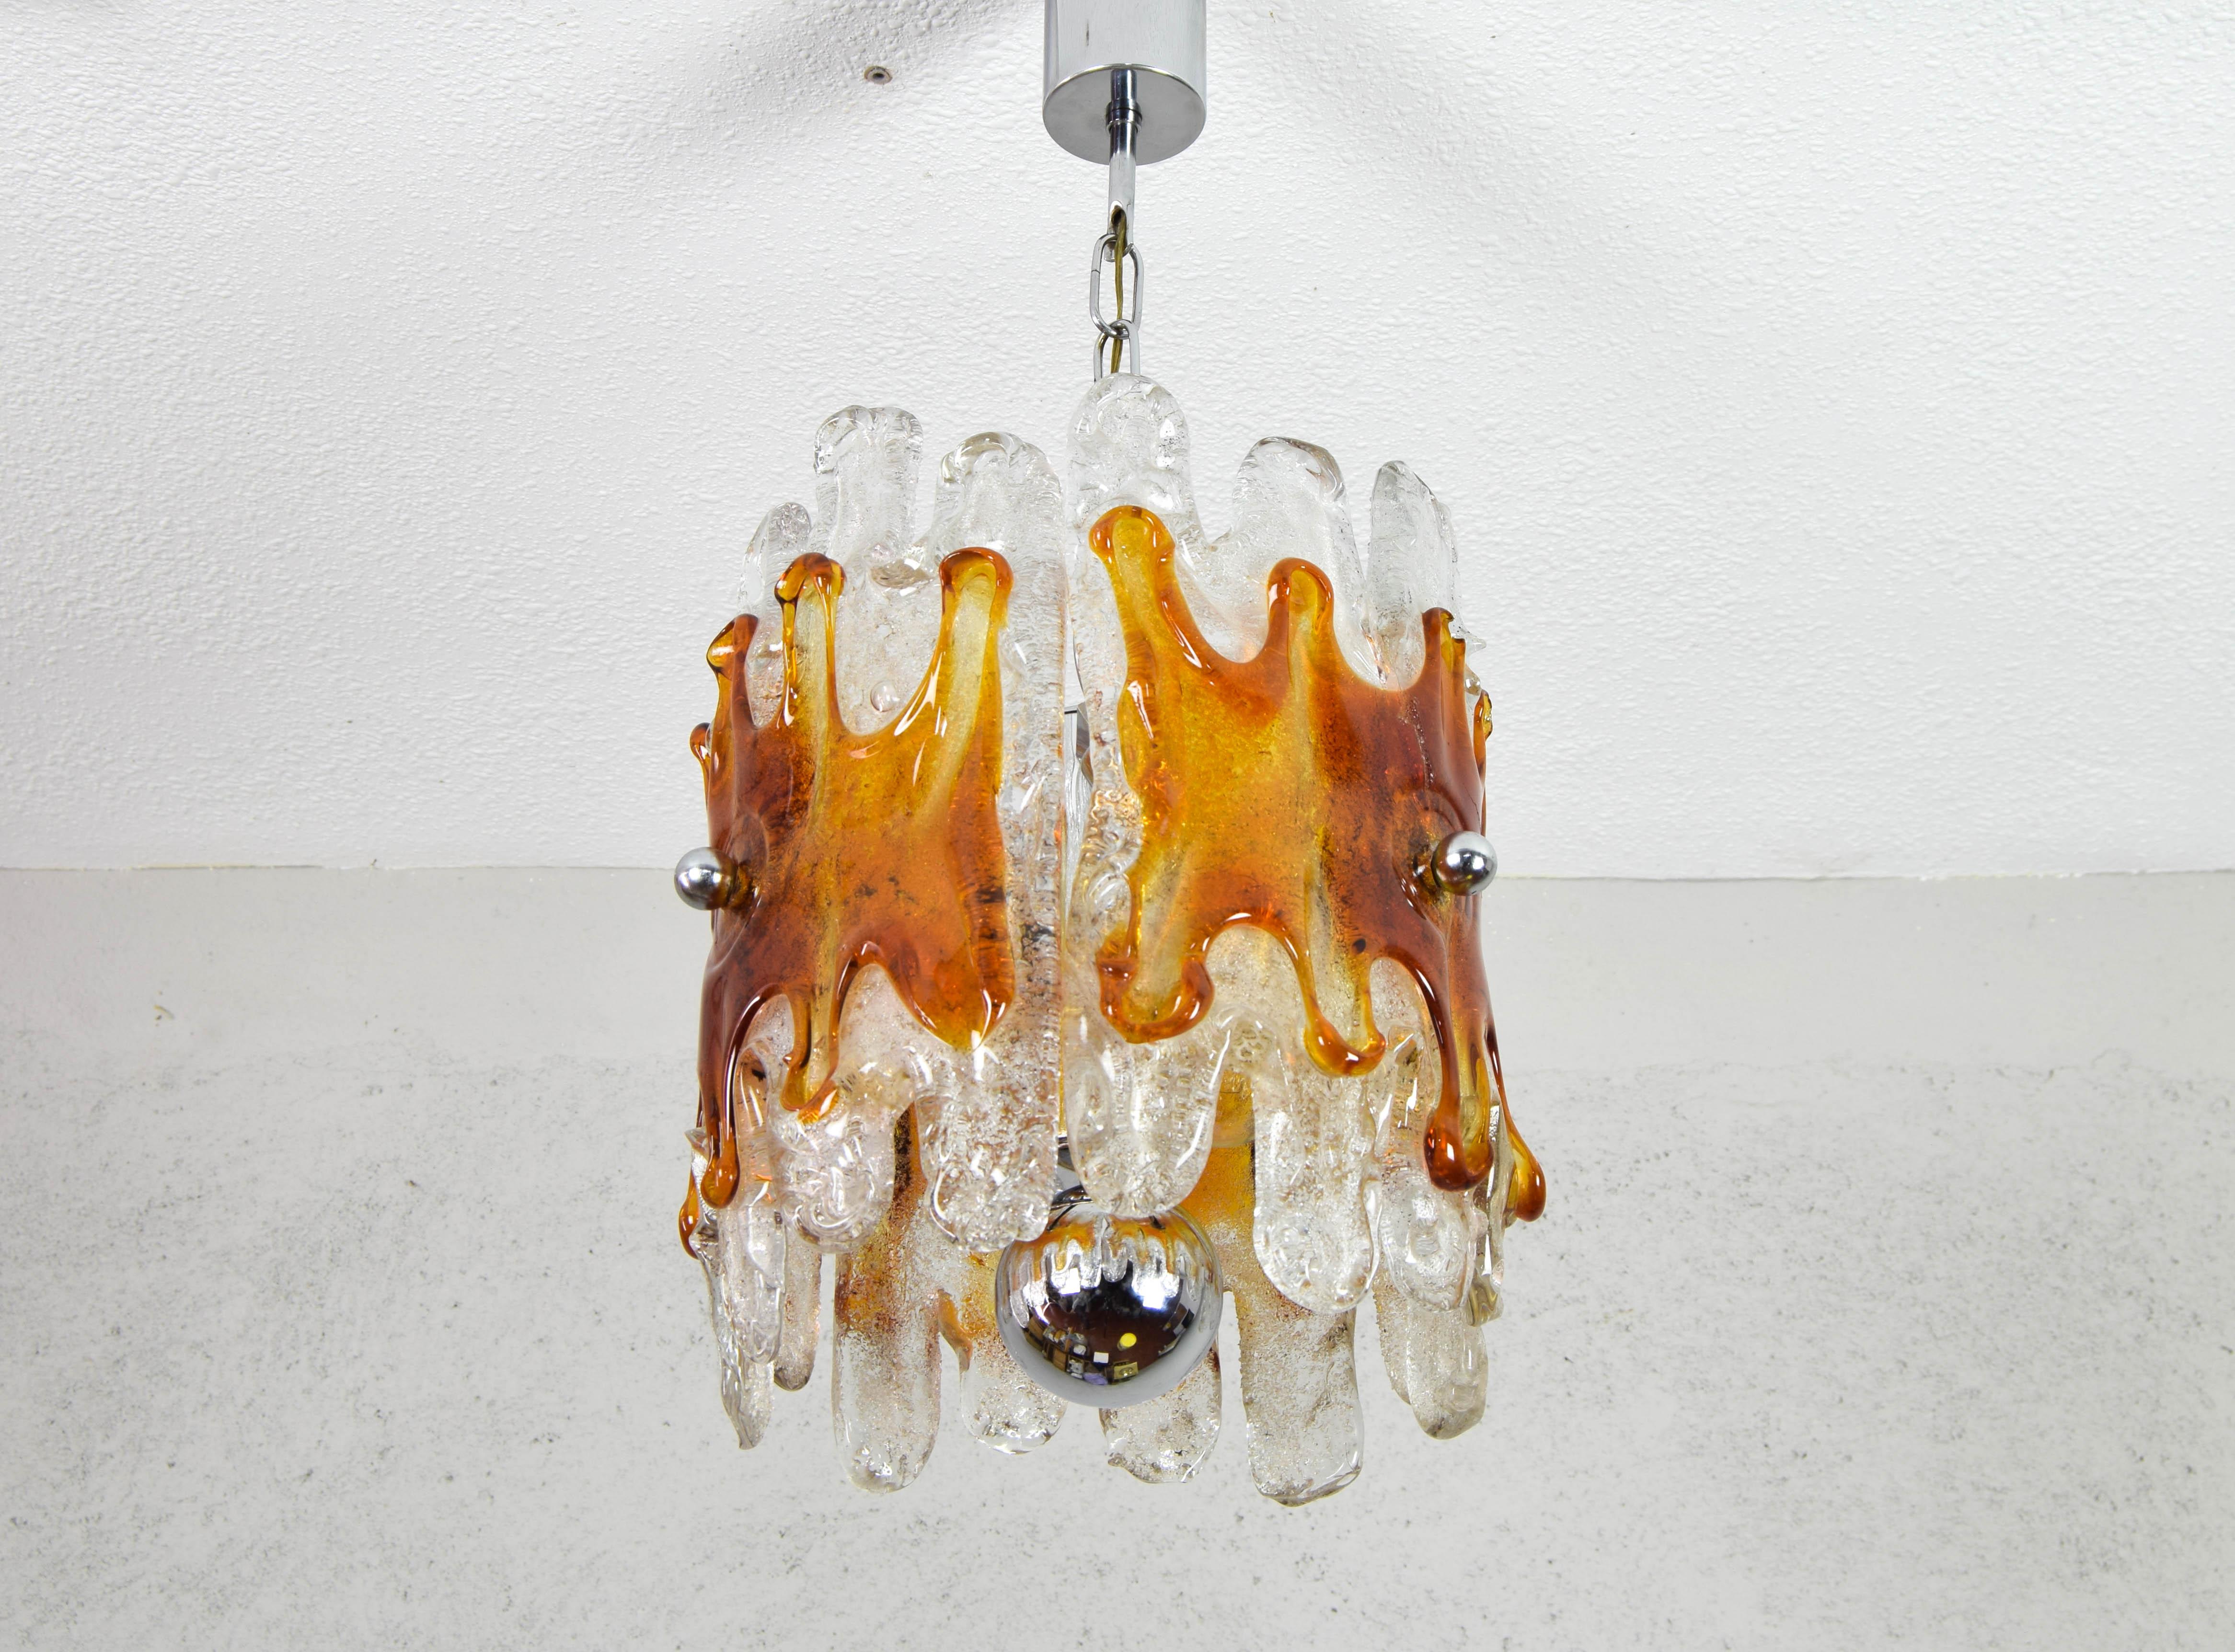 Murano glass chandelier produced by Mazzega in Italy in the 1960s.
Chromed steel body with three light sources for E14 bulbs finished at the bottom by a chromed steel ball, in each of its three arms a hand-crafted glass plate is suspended, made up